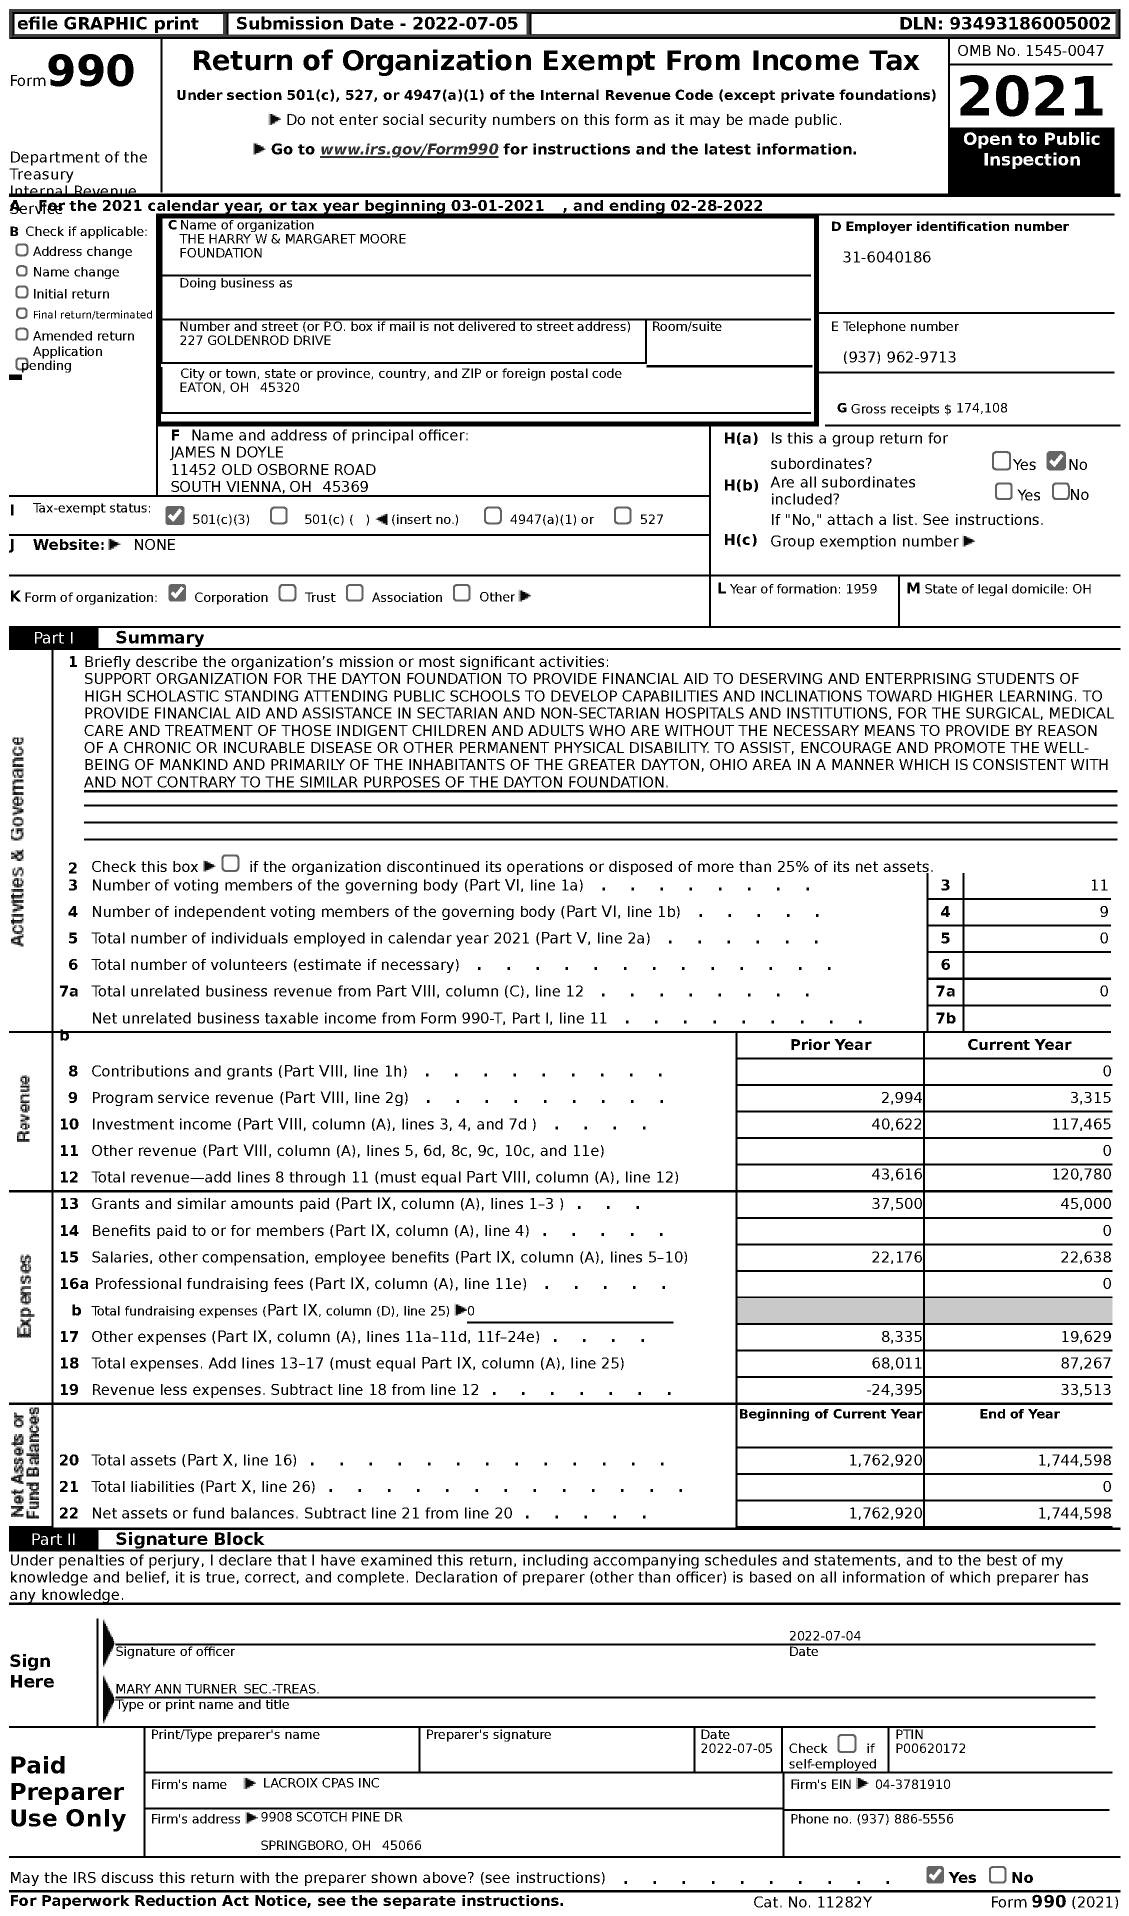 Image of first page of 2021 Form 990 for The Harry W and Margaret Moore Foundation